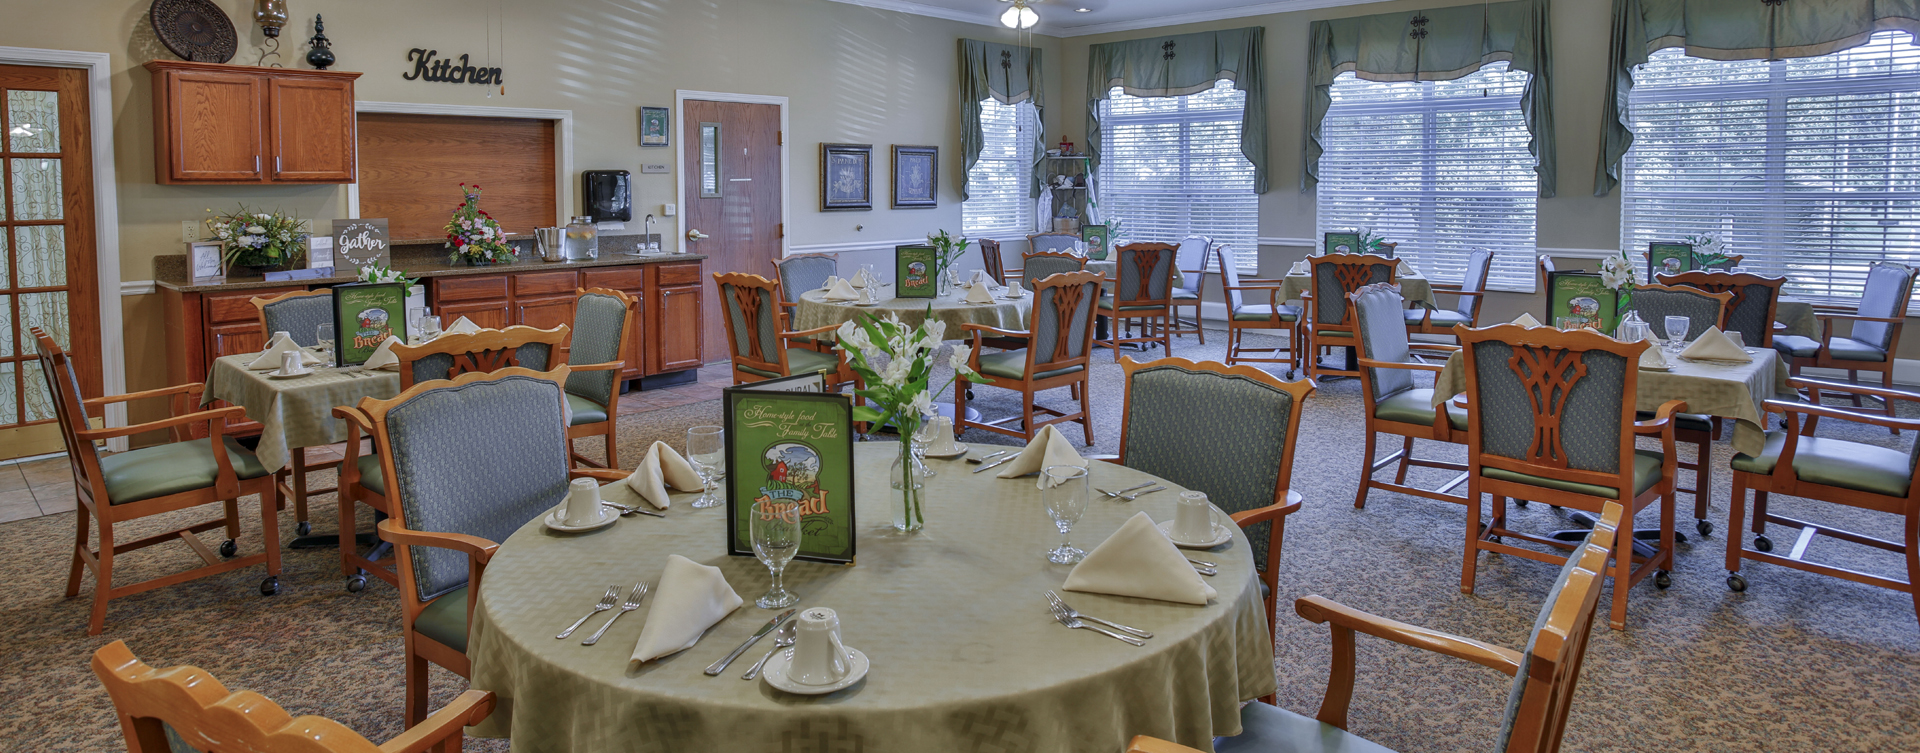 Food is best when shared with friends in the dining room at Bickford of Crawfordsville